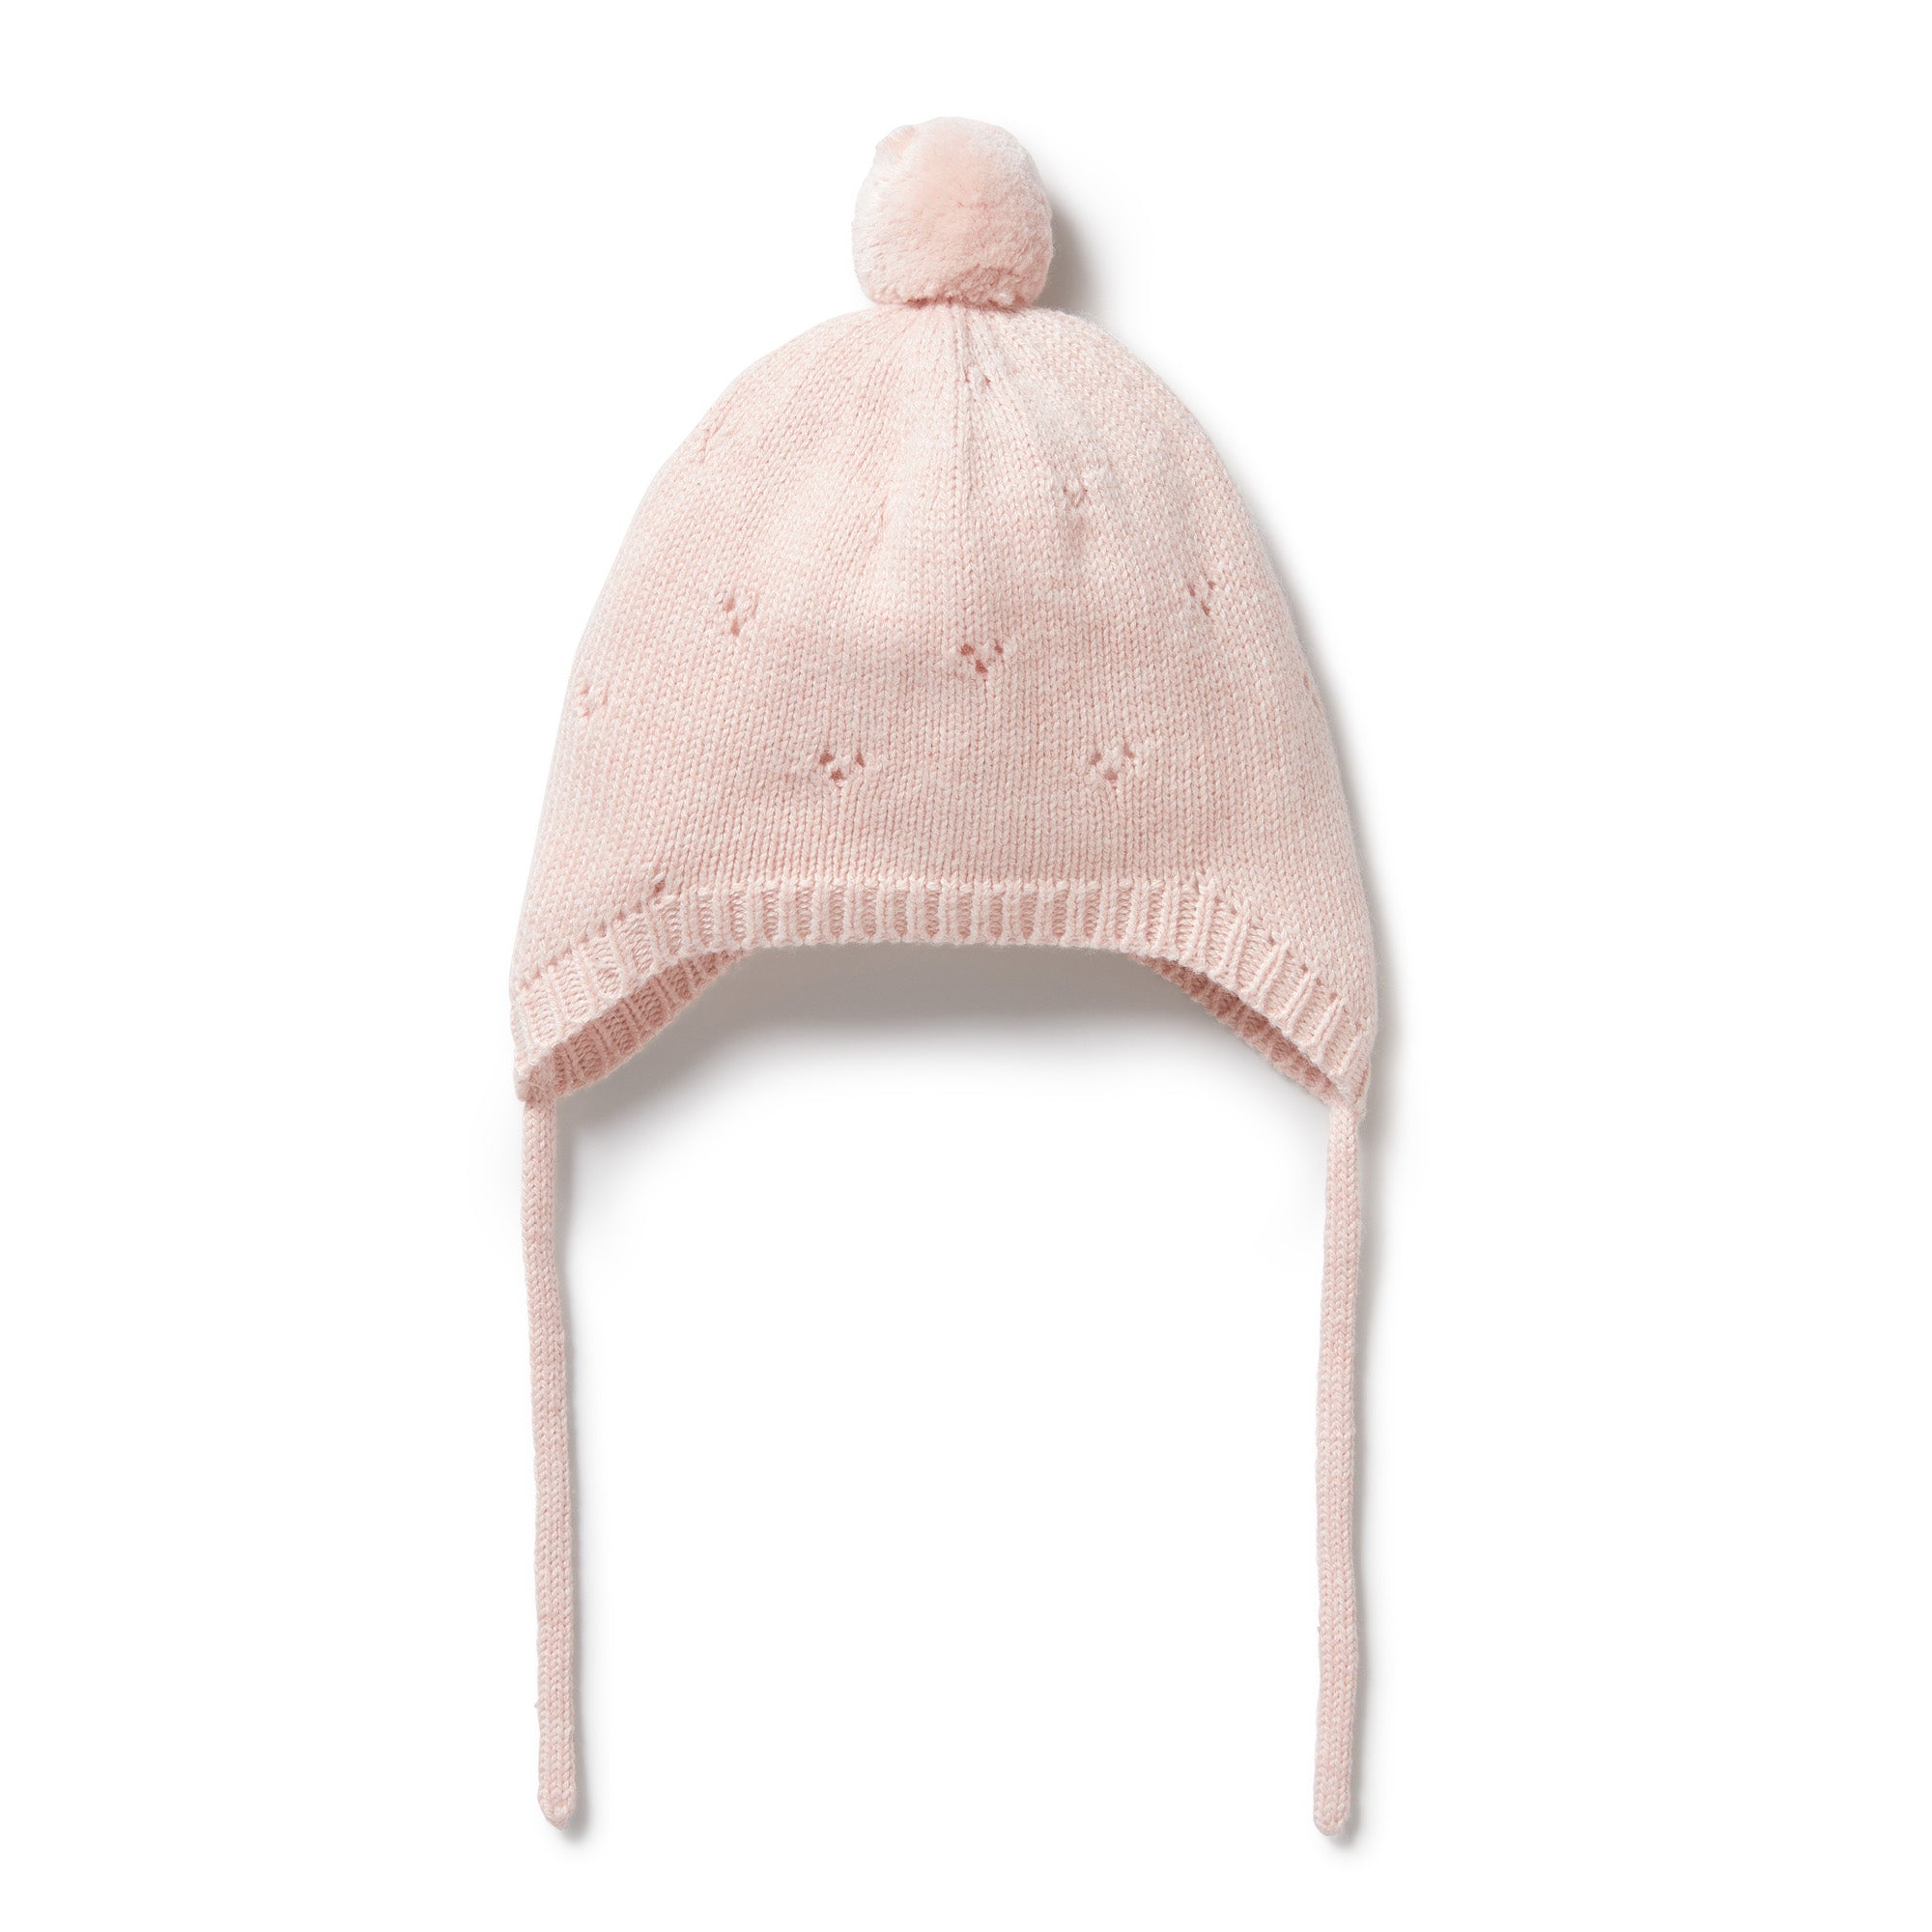 Wilson & Frenchy - Pink Knitted Pointelle Bonnet